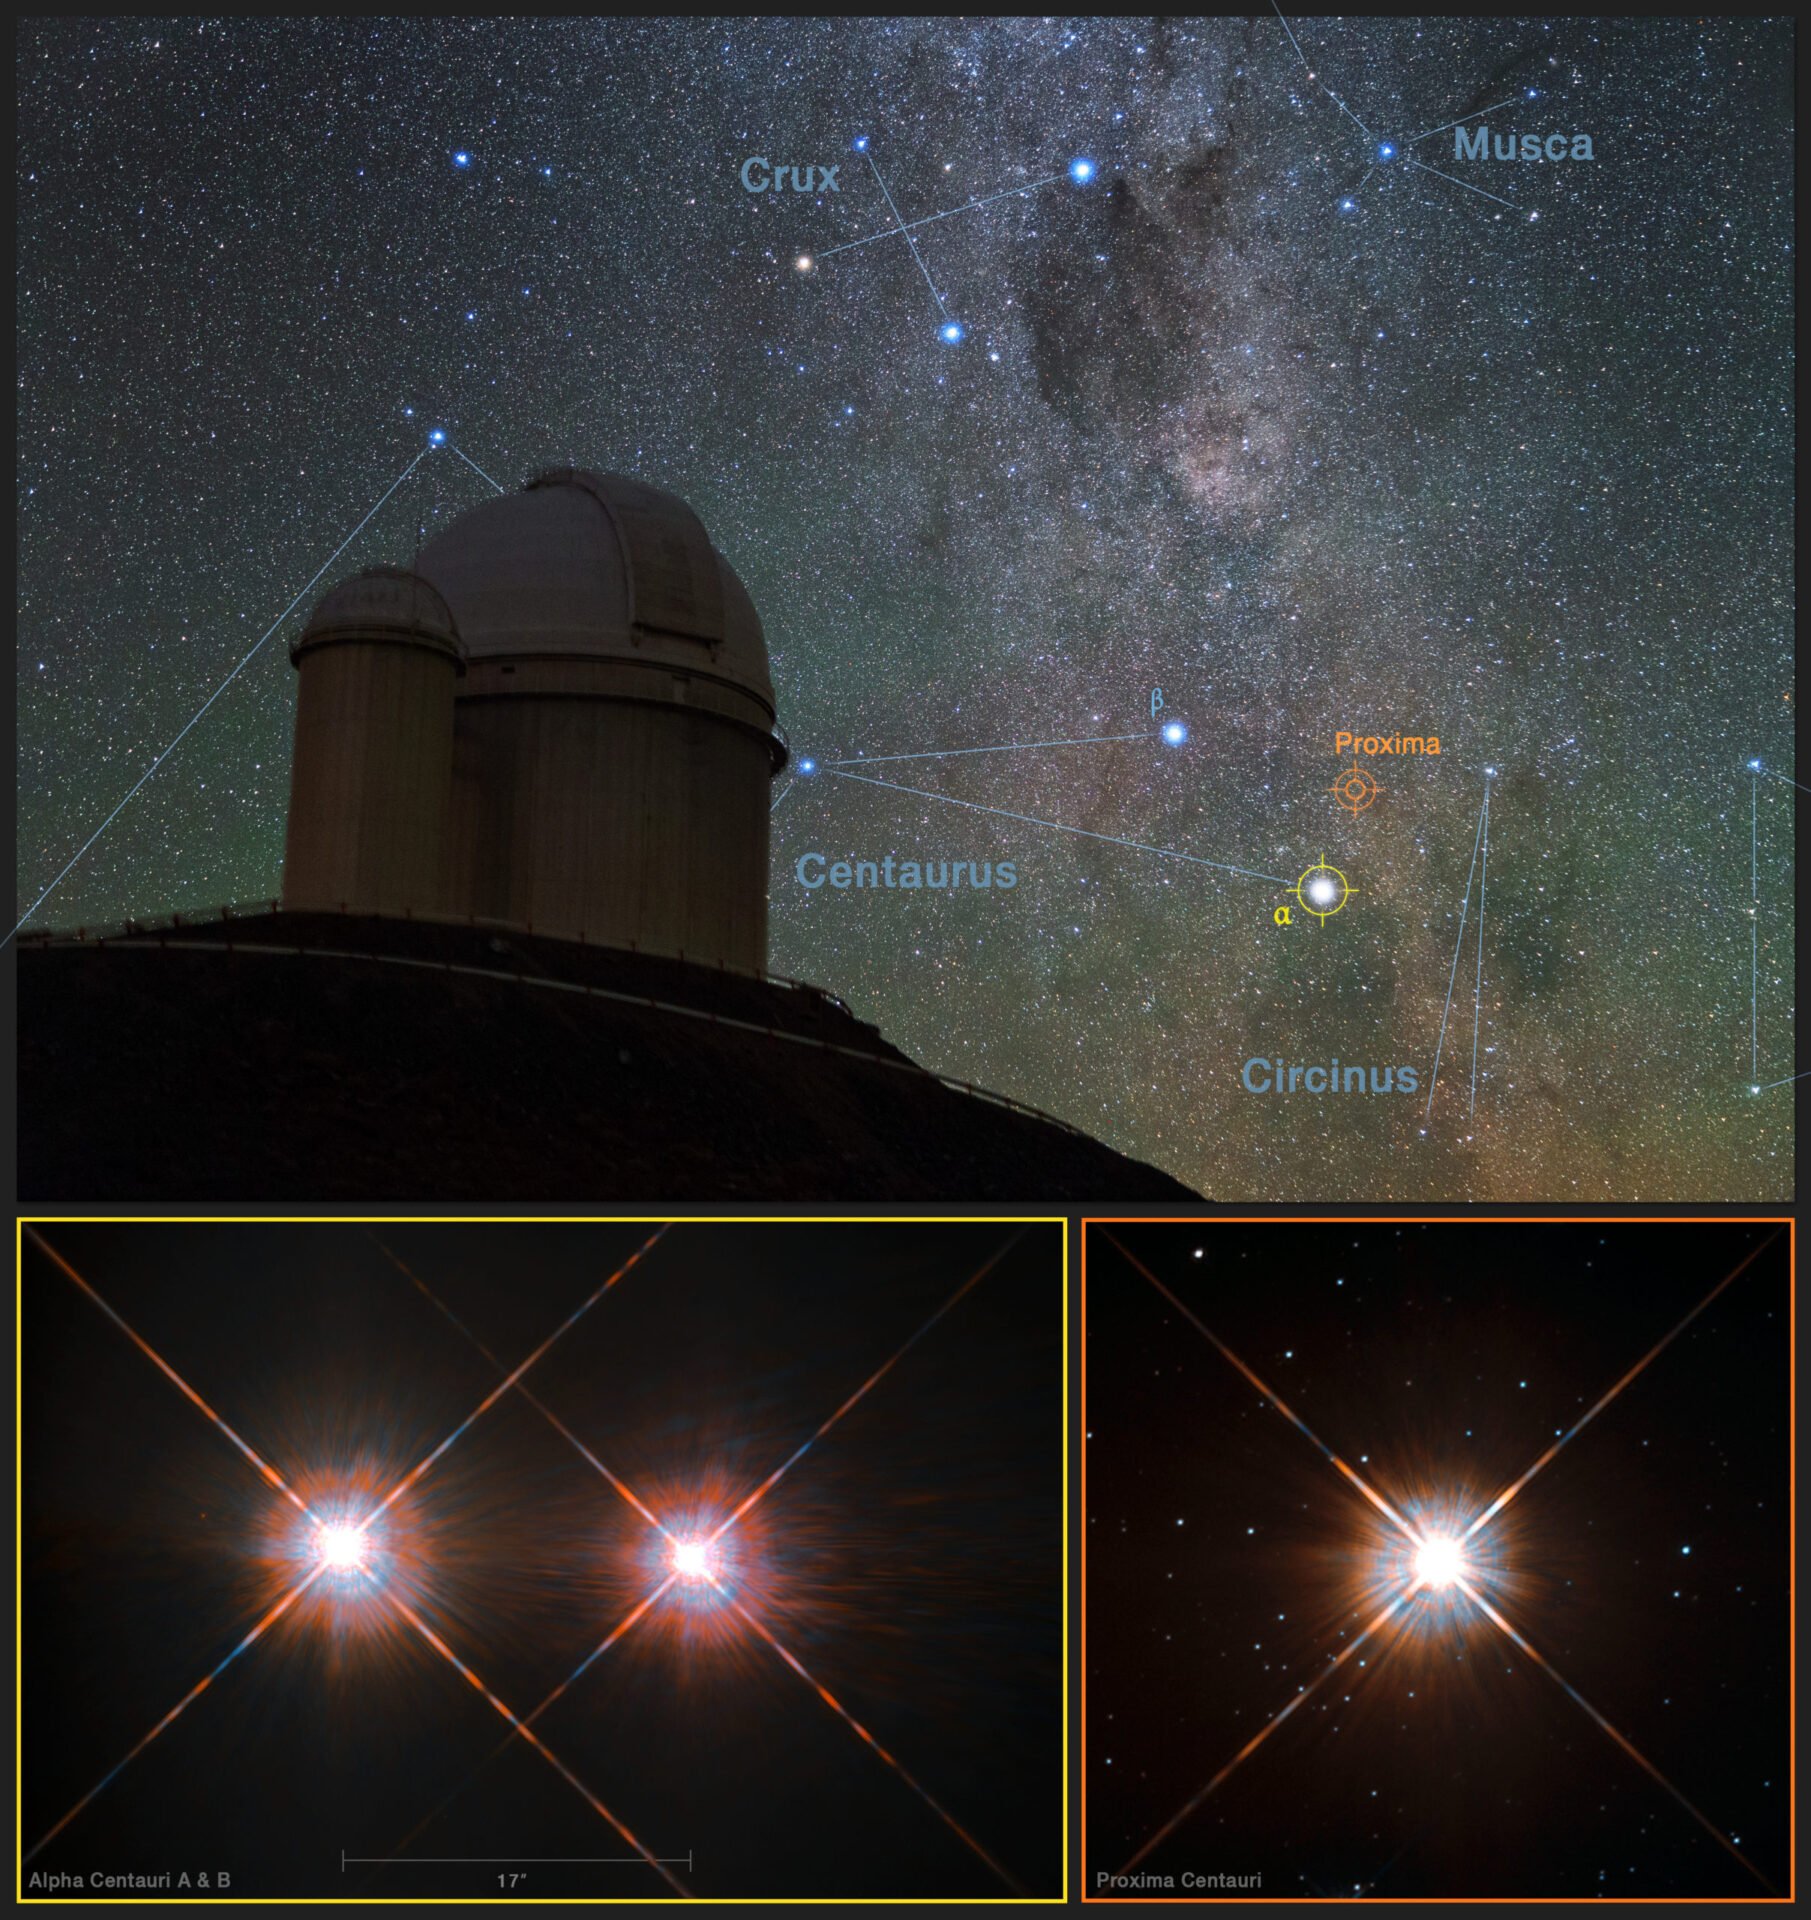 <p>This picture combines a view of the southern skies over the ESO 3.6-metre telescope at the La Silla Observatory in Chile with images of the stars Proxima Centauri (lower-right) and the double star Alpha Centauri AB (lower-left) from the NASA/ESA Hubble Space Telescope. Proxima Centauri is the closest star to the Solar System and is orbited by the planet Proxima b, which was discovered using the HARPS instrument on the ESO 3.6-metre telescope. Credit: Y. Beletsky (LCO)/ESO/ESA/NASA/M. Zamani</p>
